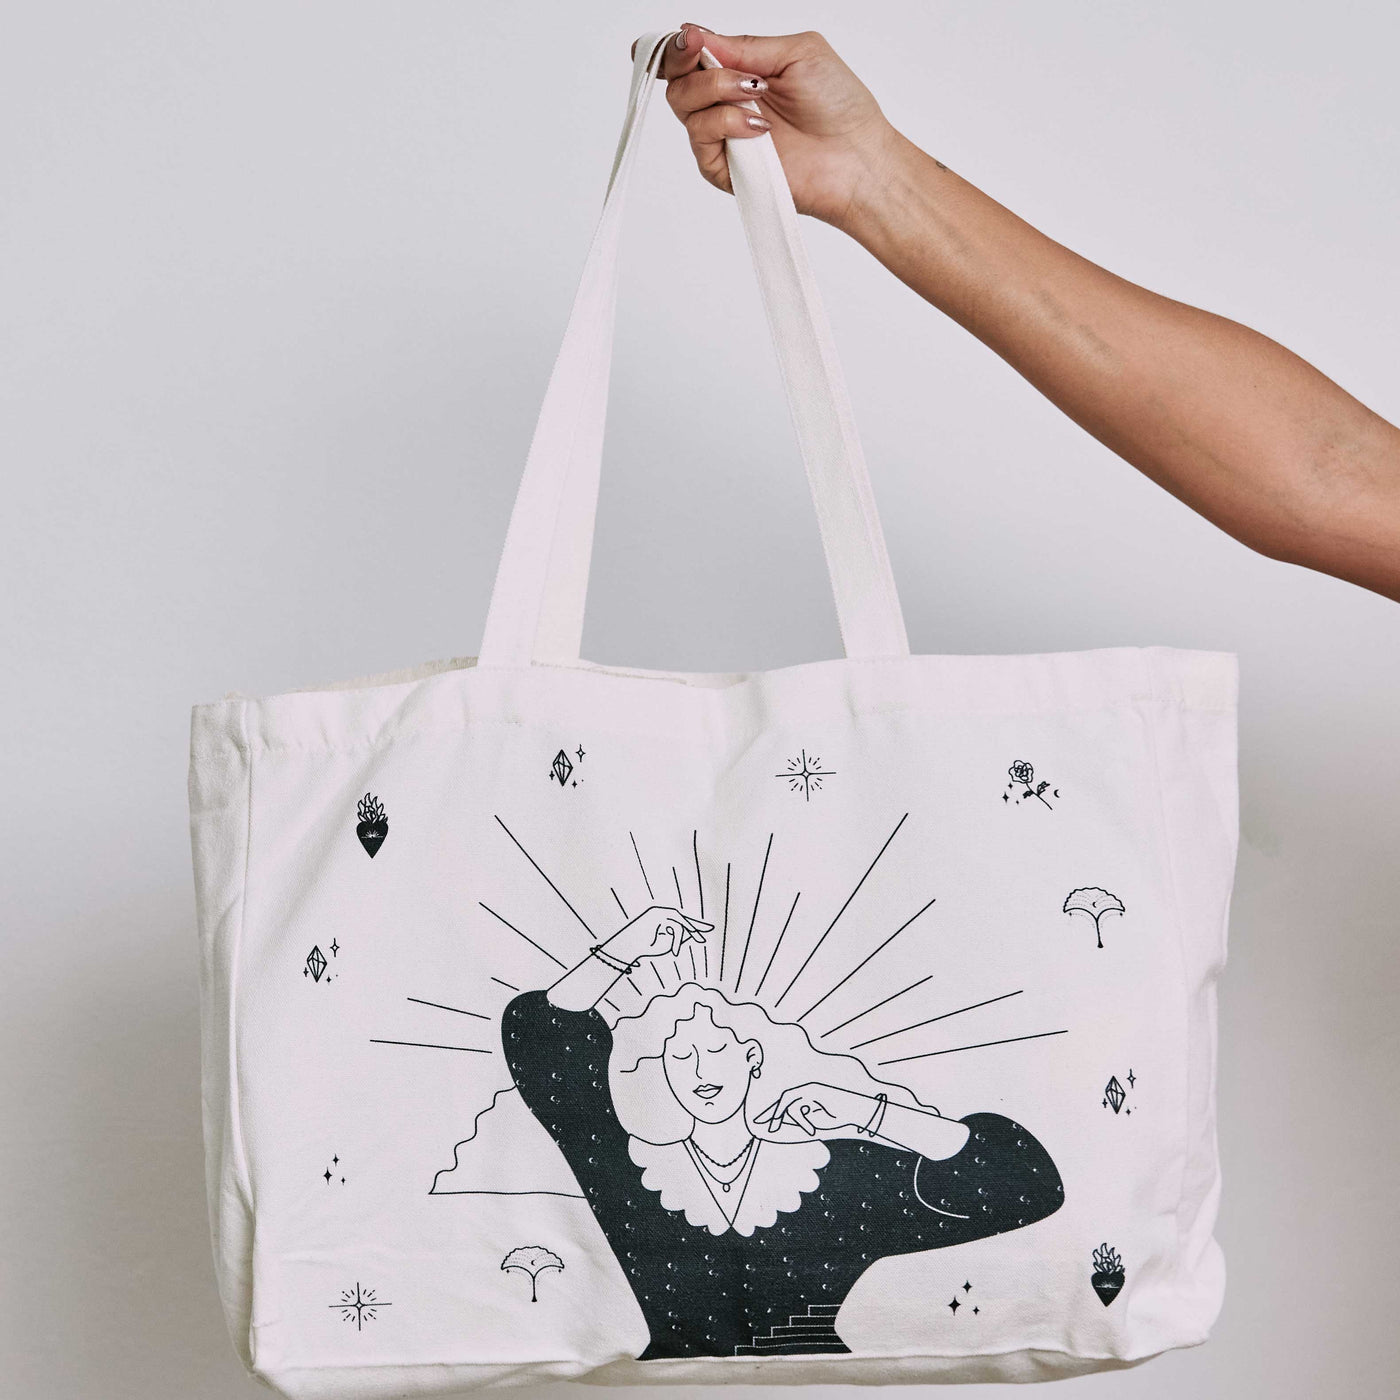 ‘Create Your Own Sunshine’ Tote Bag